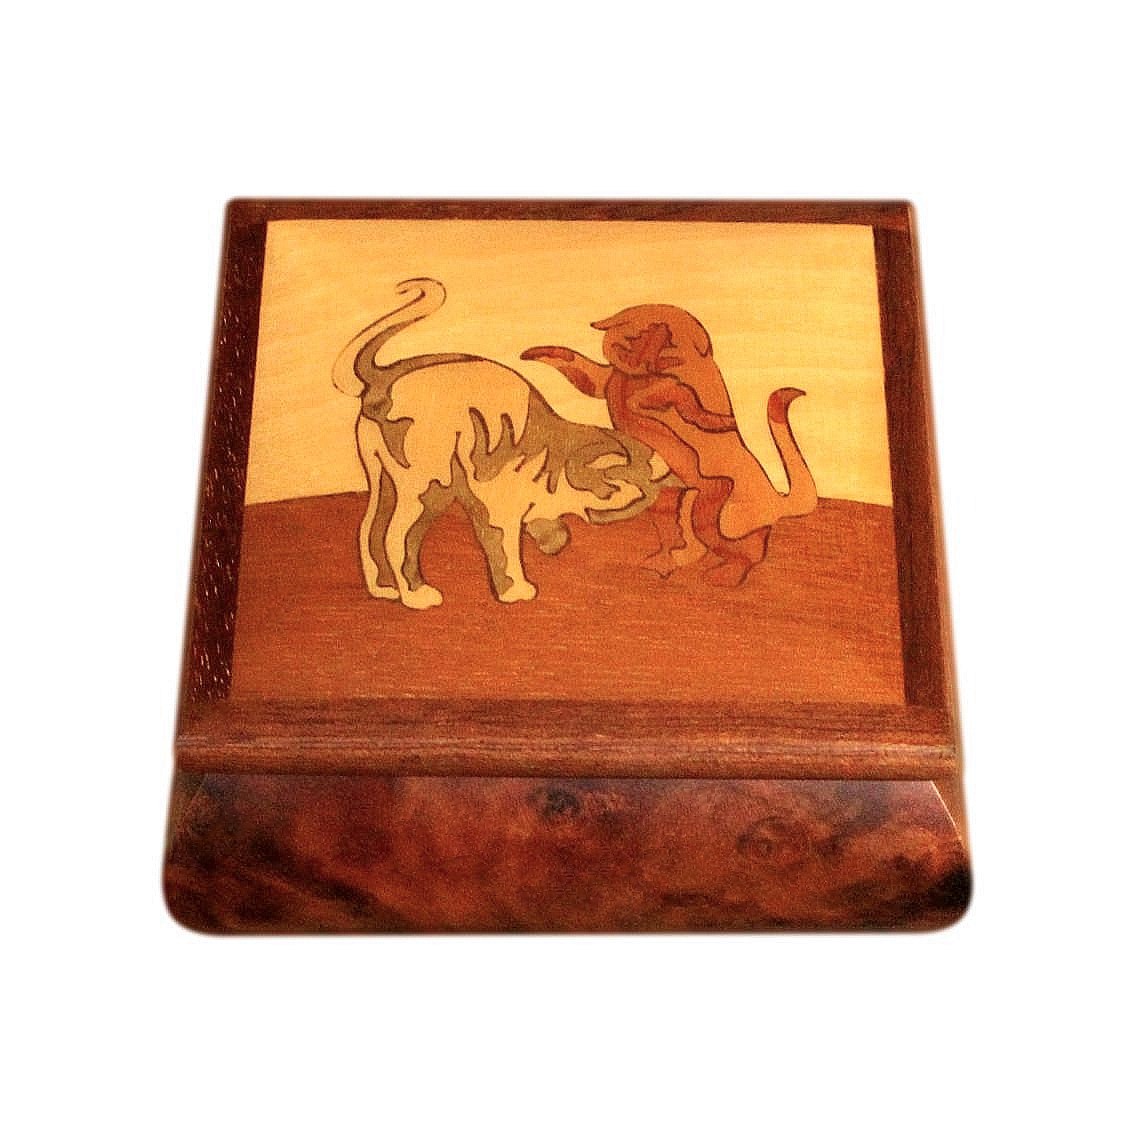 Vintage Sorrento Jewellery Box With Marquetry Inlaid Cats